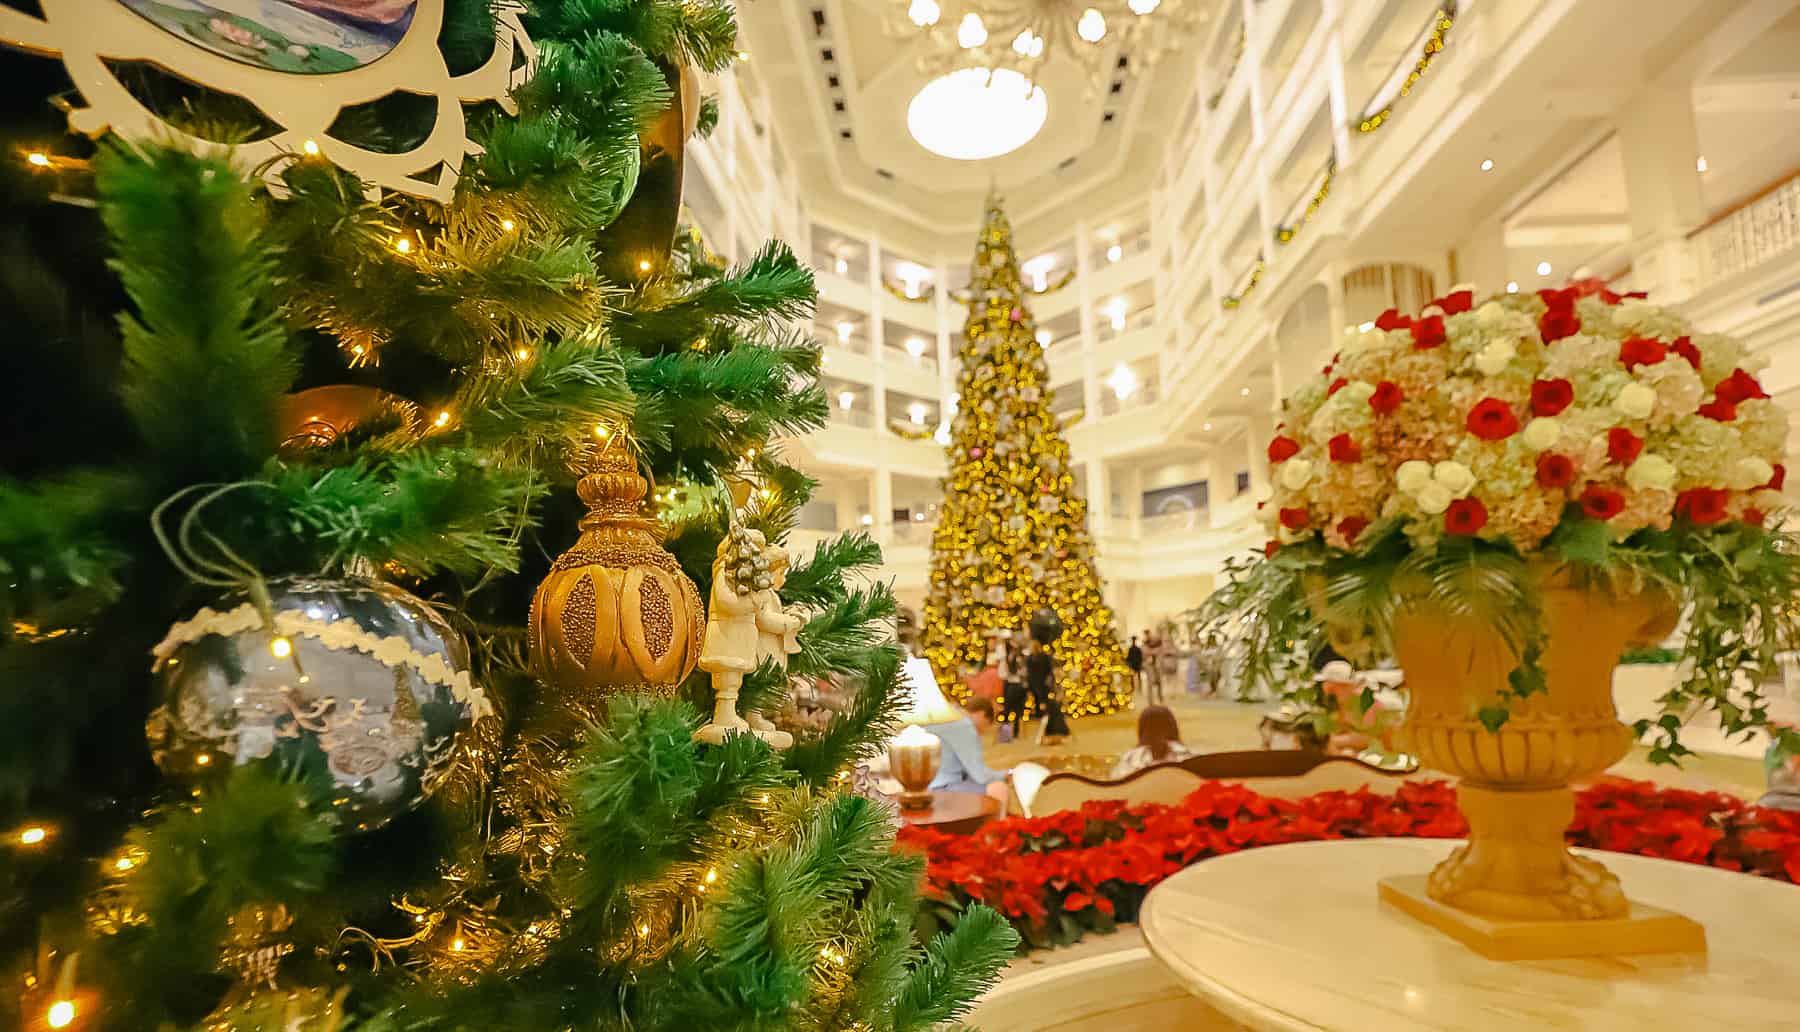 Shows multiple trees at Grand Floridian in one photo. 